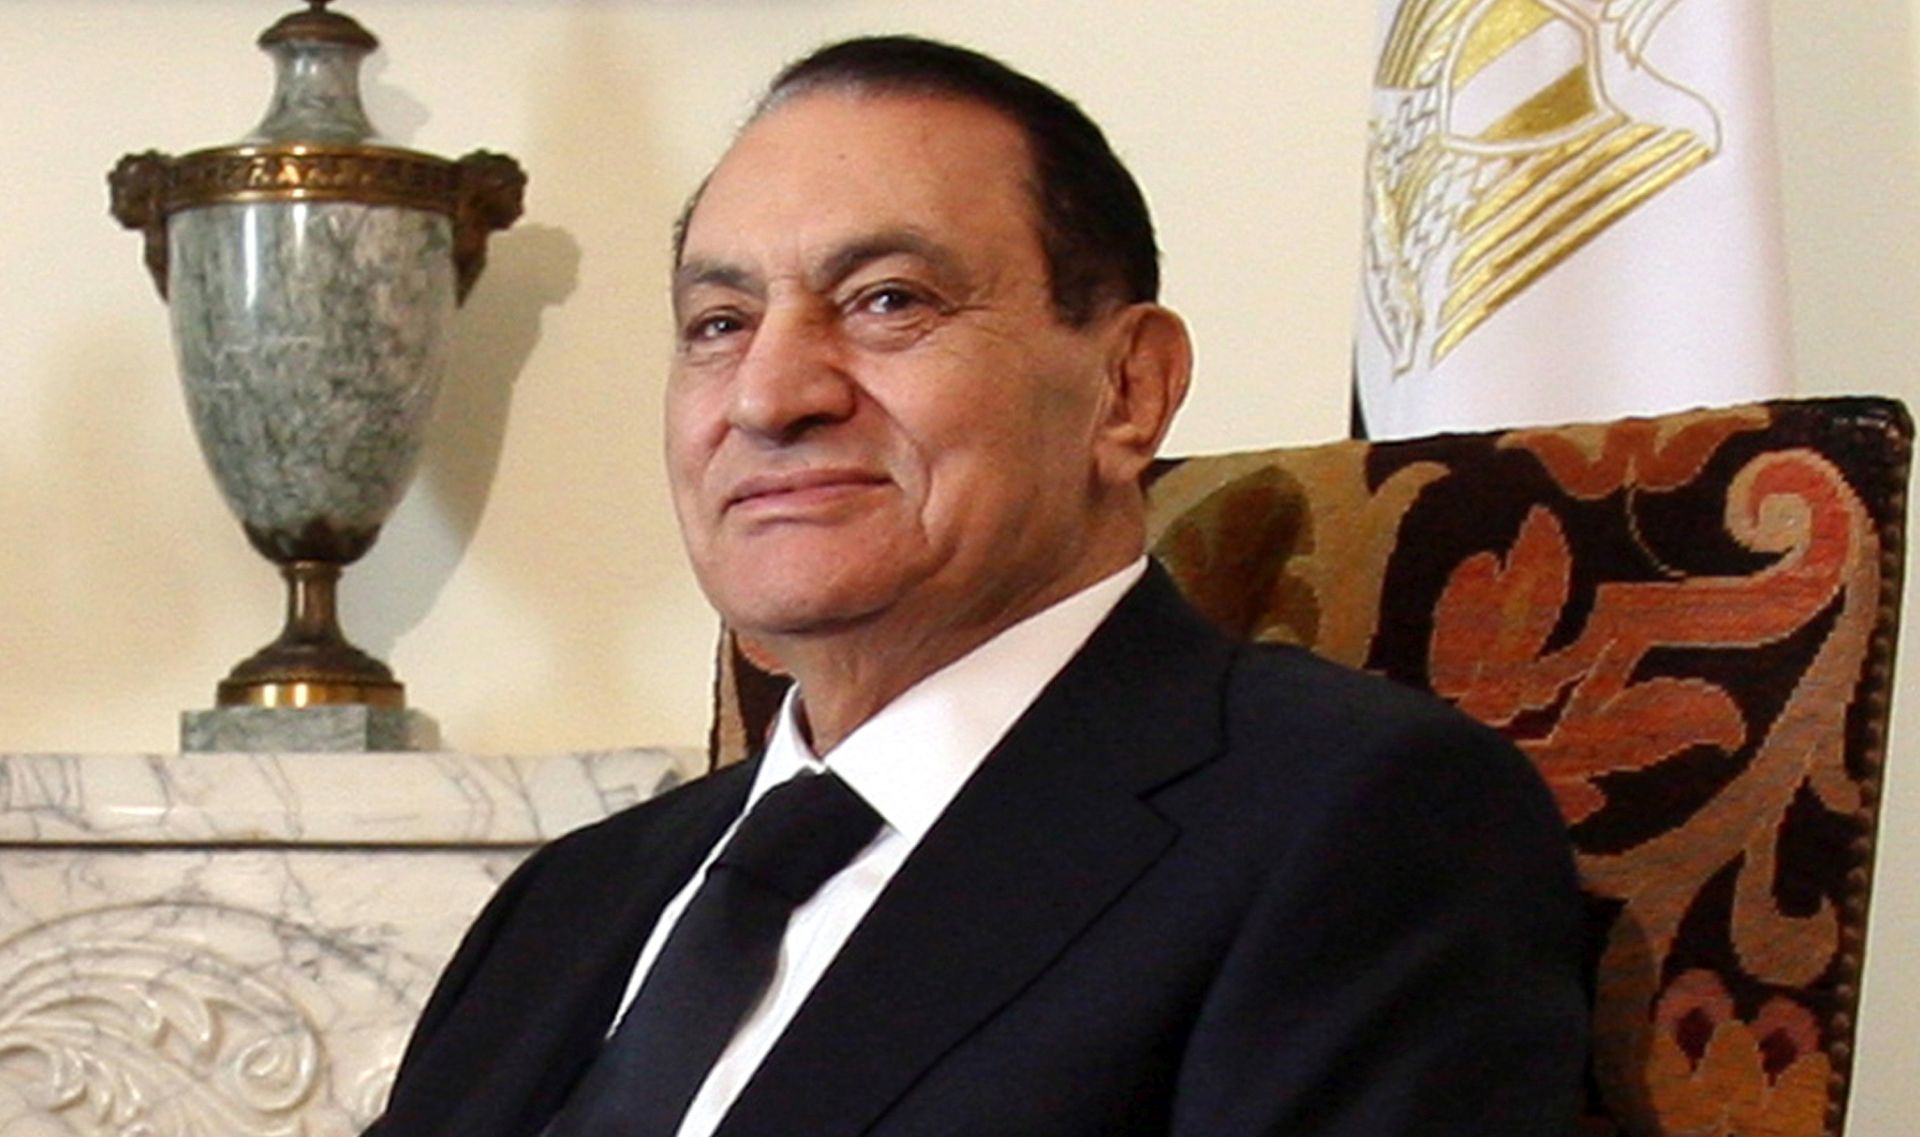 epa08246221 (FILE) - Egyptian President Hosni Mubarak looking on during his meeting with his Yemeni counterpart Ali Abdullah Saleh (not pictured) in Cairo, Egypt, 29 June 2010 (reissued 25 February 2020). According to media reports on 25 February 2020, Former Egyptian President Hosni Mubarak has died aged 92. Hosni Mubarak ruled Egypt from October 1981 till January 2011, and stepped down of the presidency after the 18-days Egyptian revolution of 2011.  EPA/AMEL PAIN